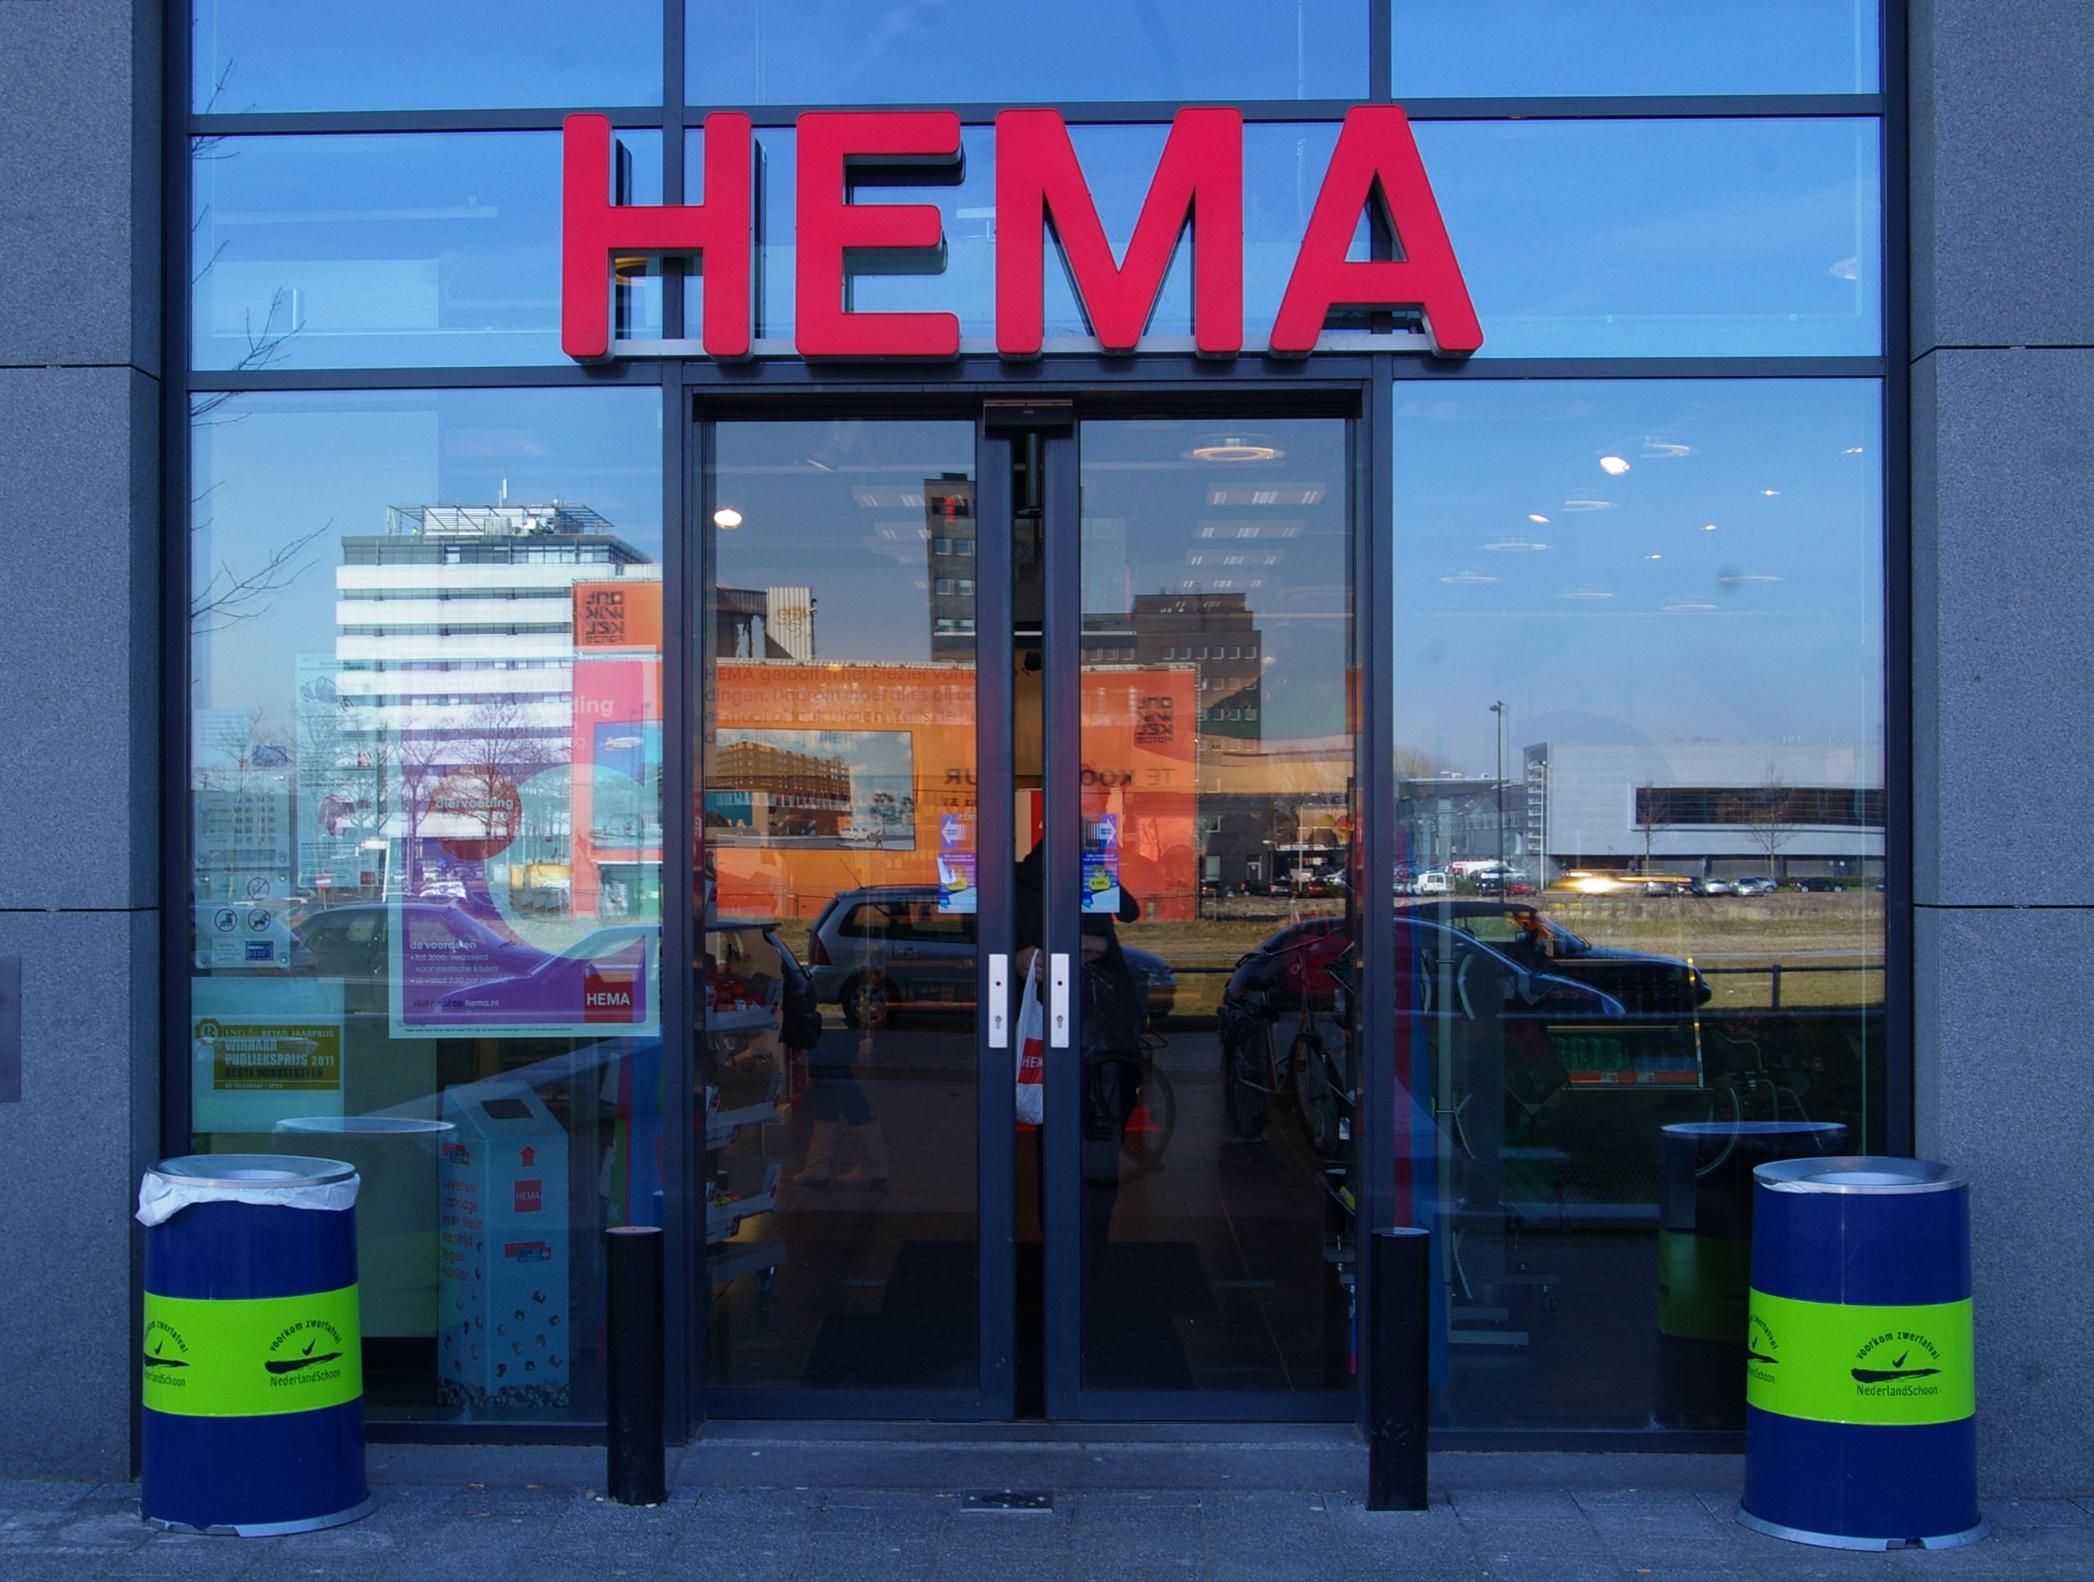 Cover image of this place HEMA